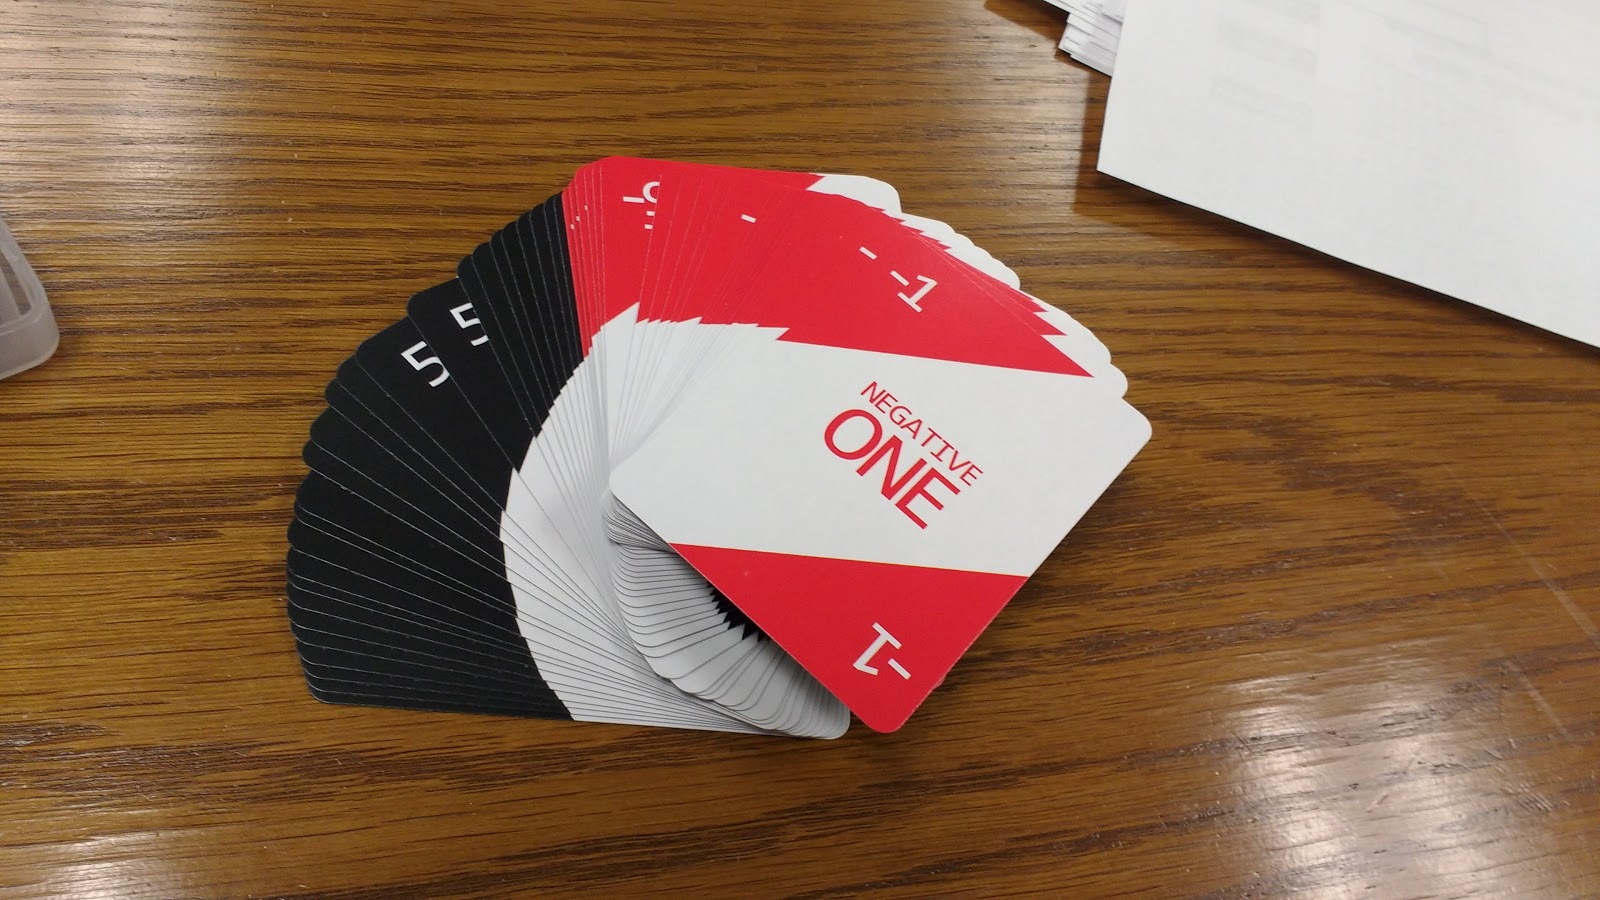 absolute zero card game for math class